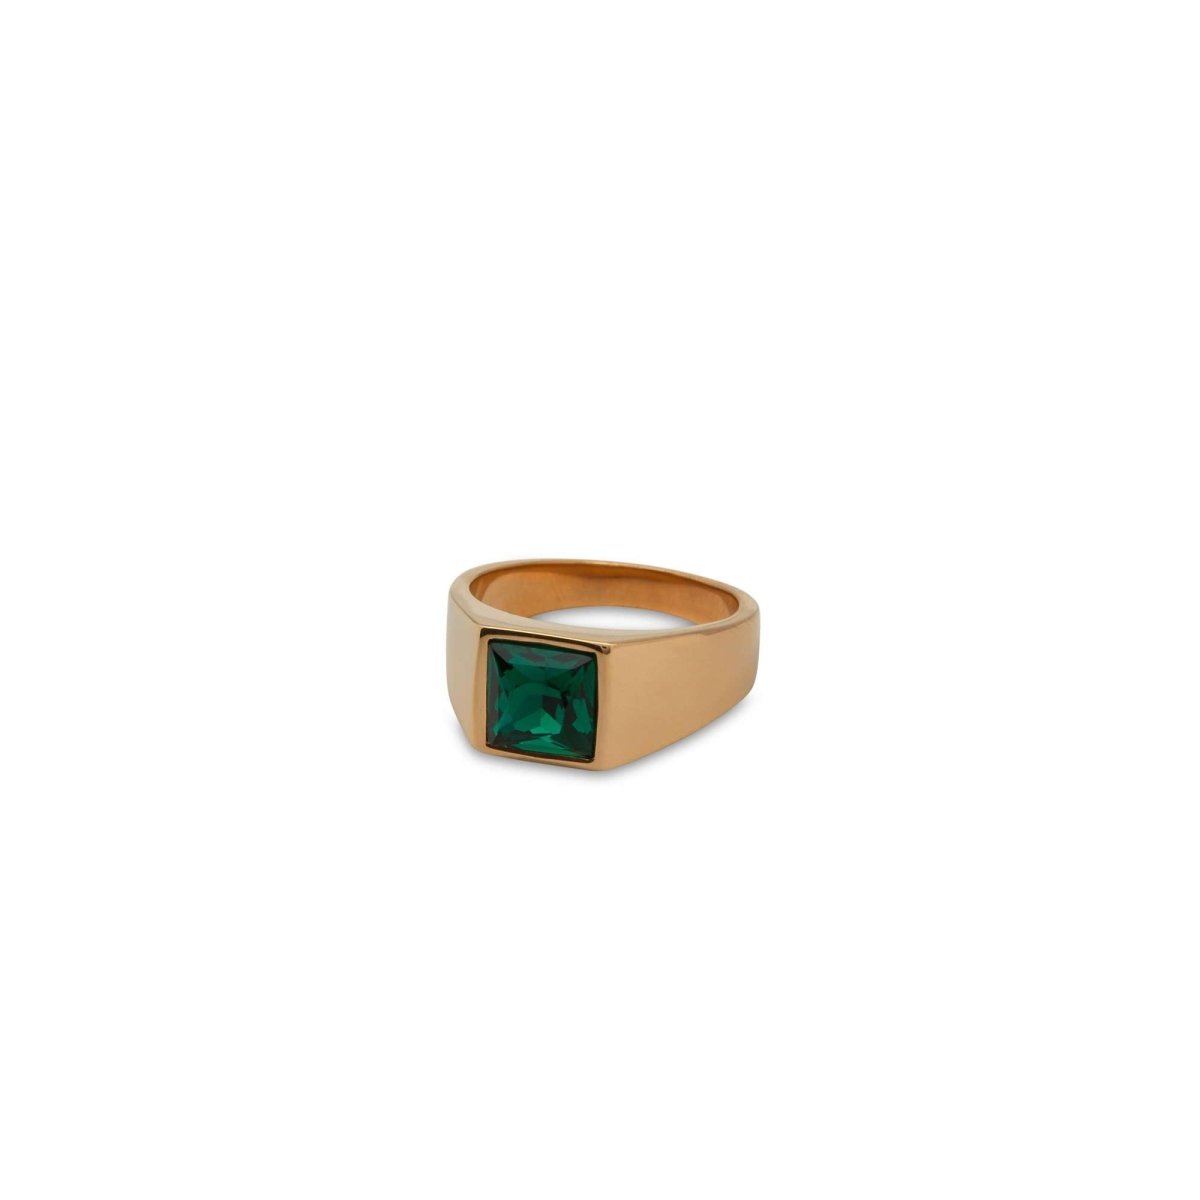 Embedded Crystal Gold Ring - MenSuits